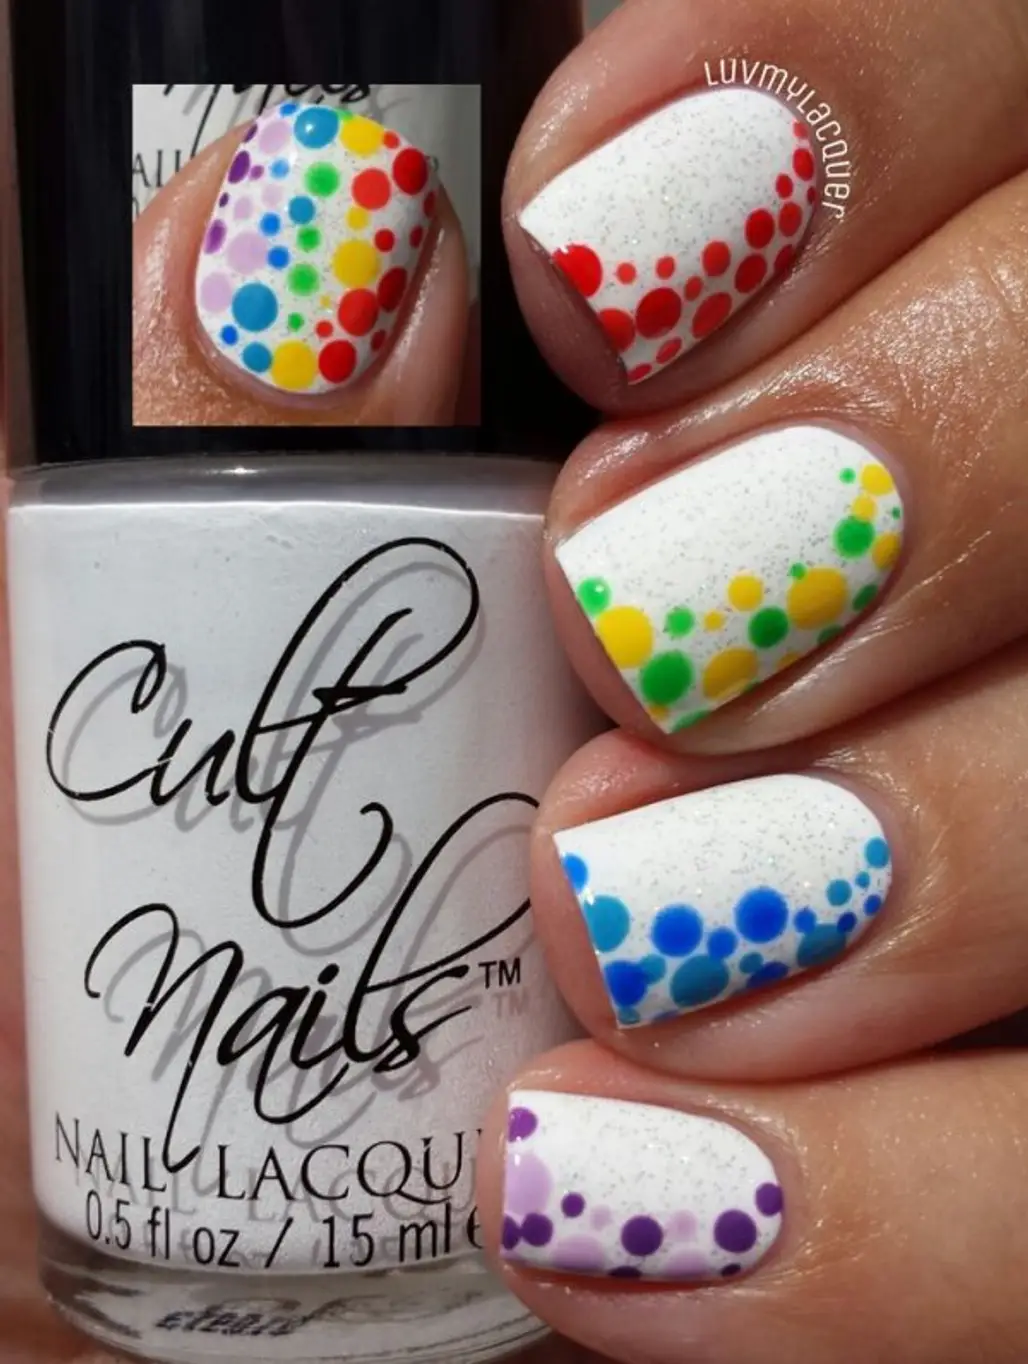 color,nail,finger,hand,manicure,